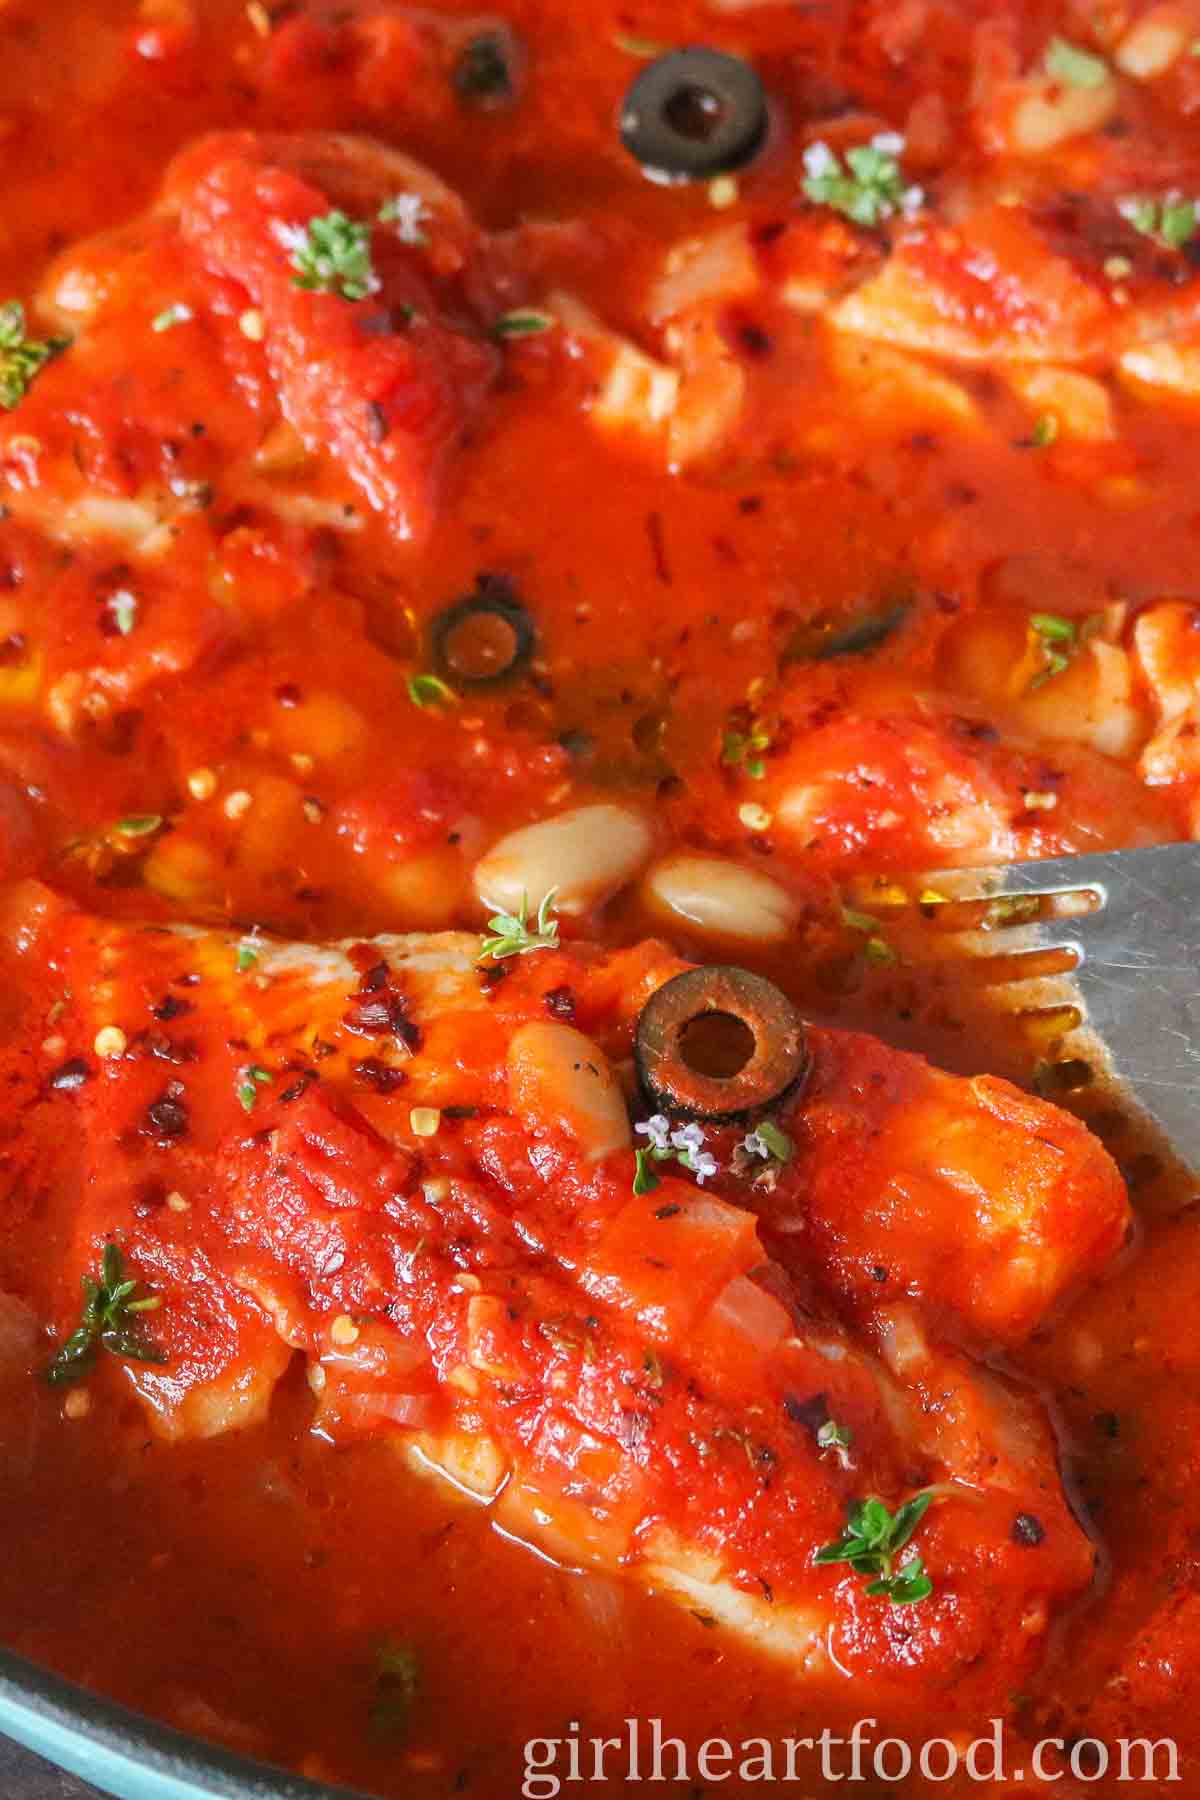 Fillet of cod in tomato sauce with a spatula underneath.